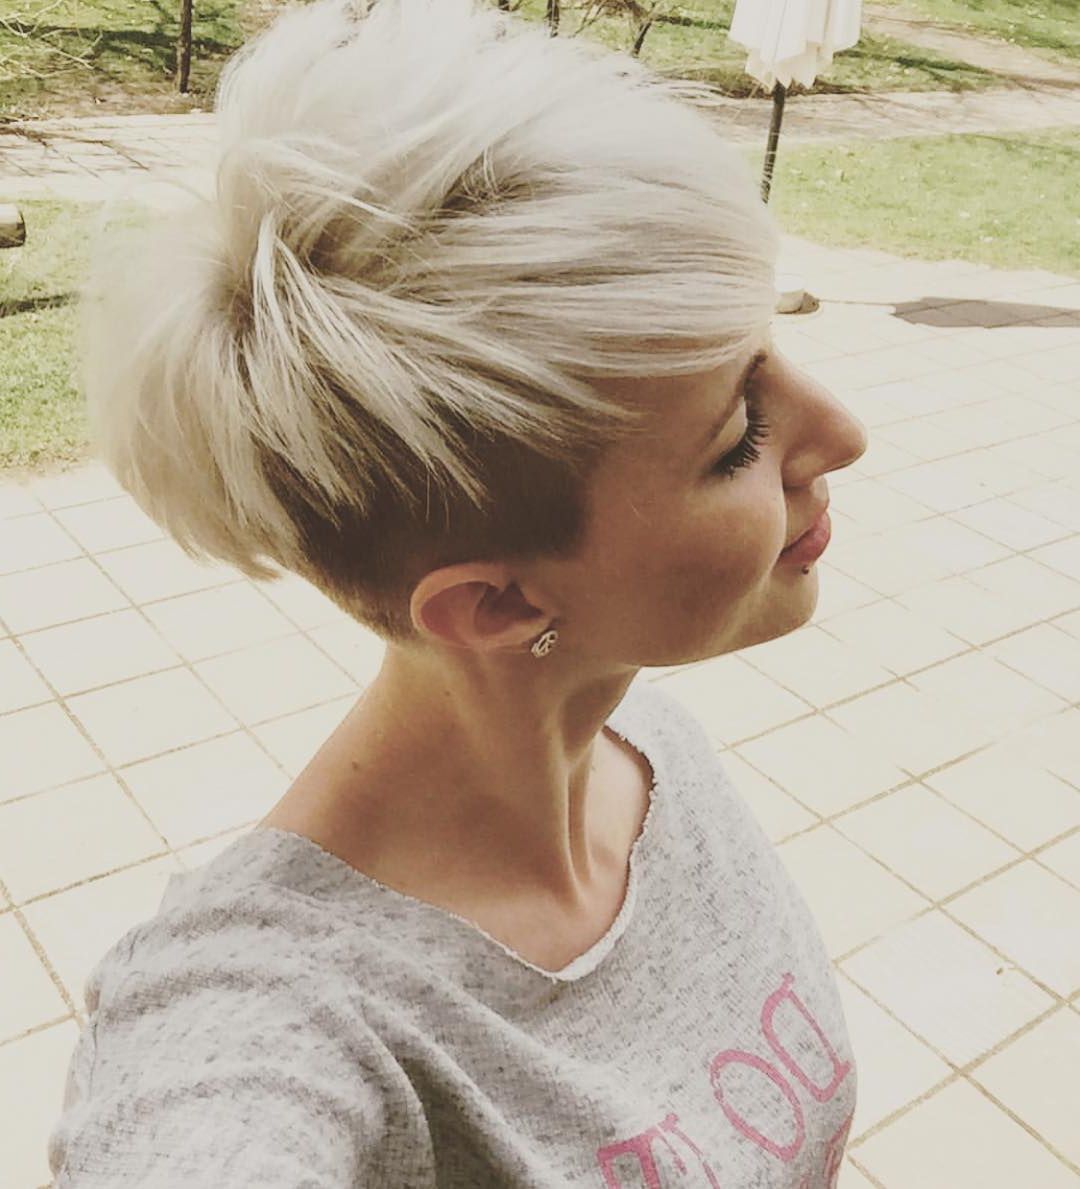 10 Stylish Feminine Pixie Haircuts, Short Hair Styles 2020 Pertaining To Vintage Pixie Haircuts (View 16 of 20)